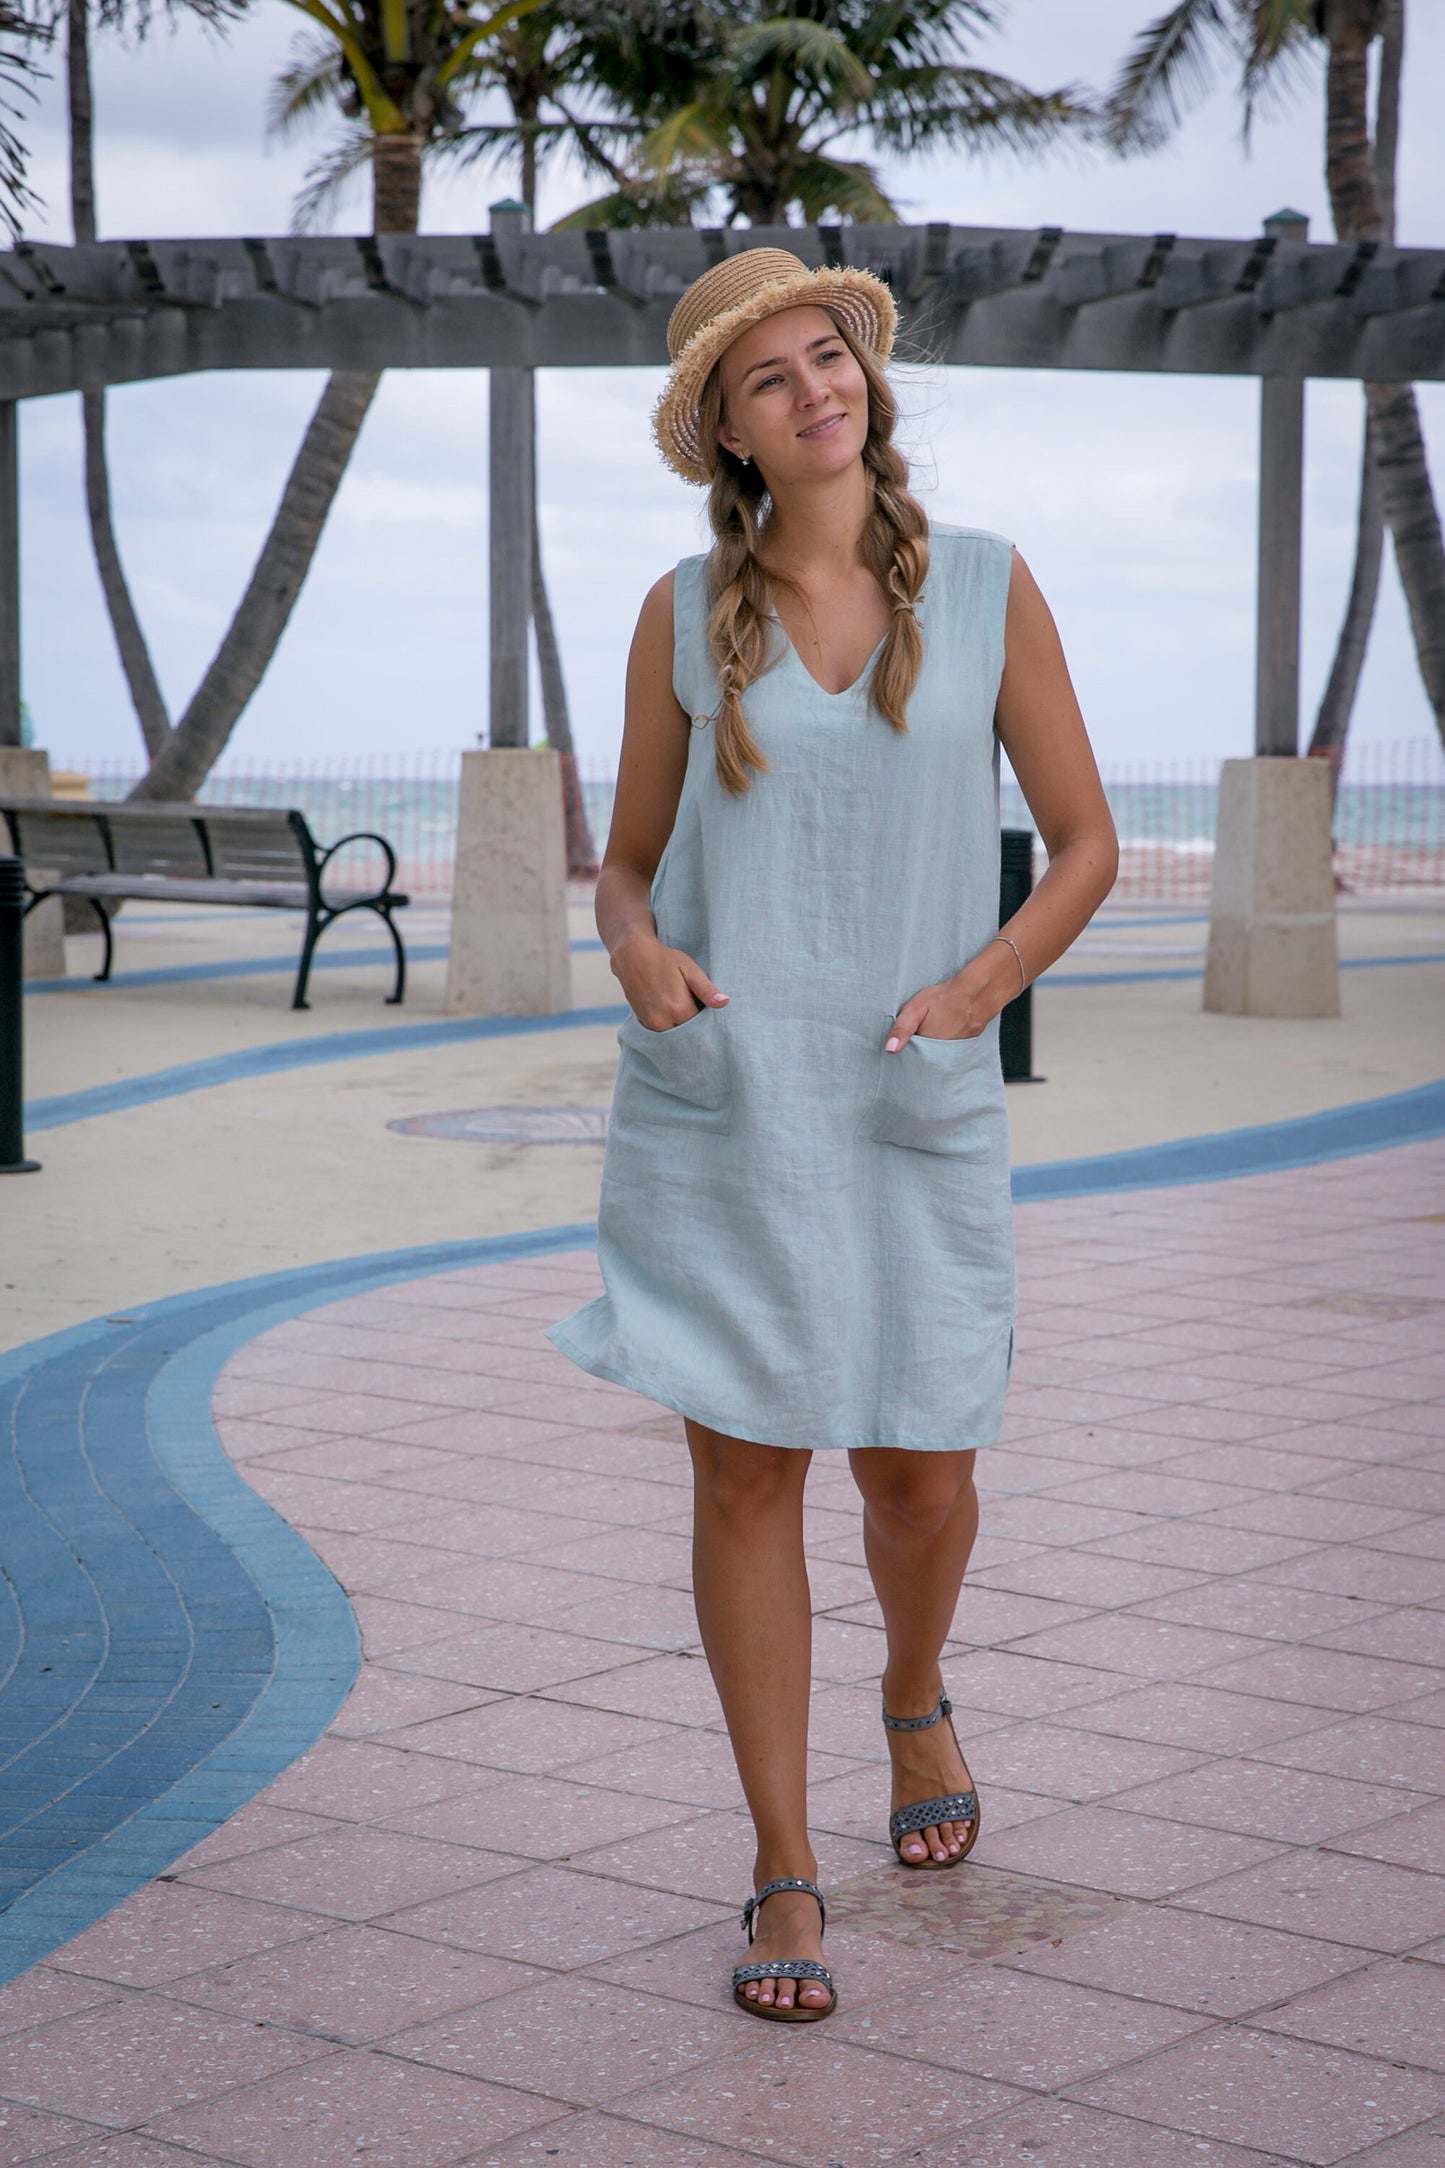 Linen April Dress: The embodiment of timeless and comfortable fashion.